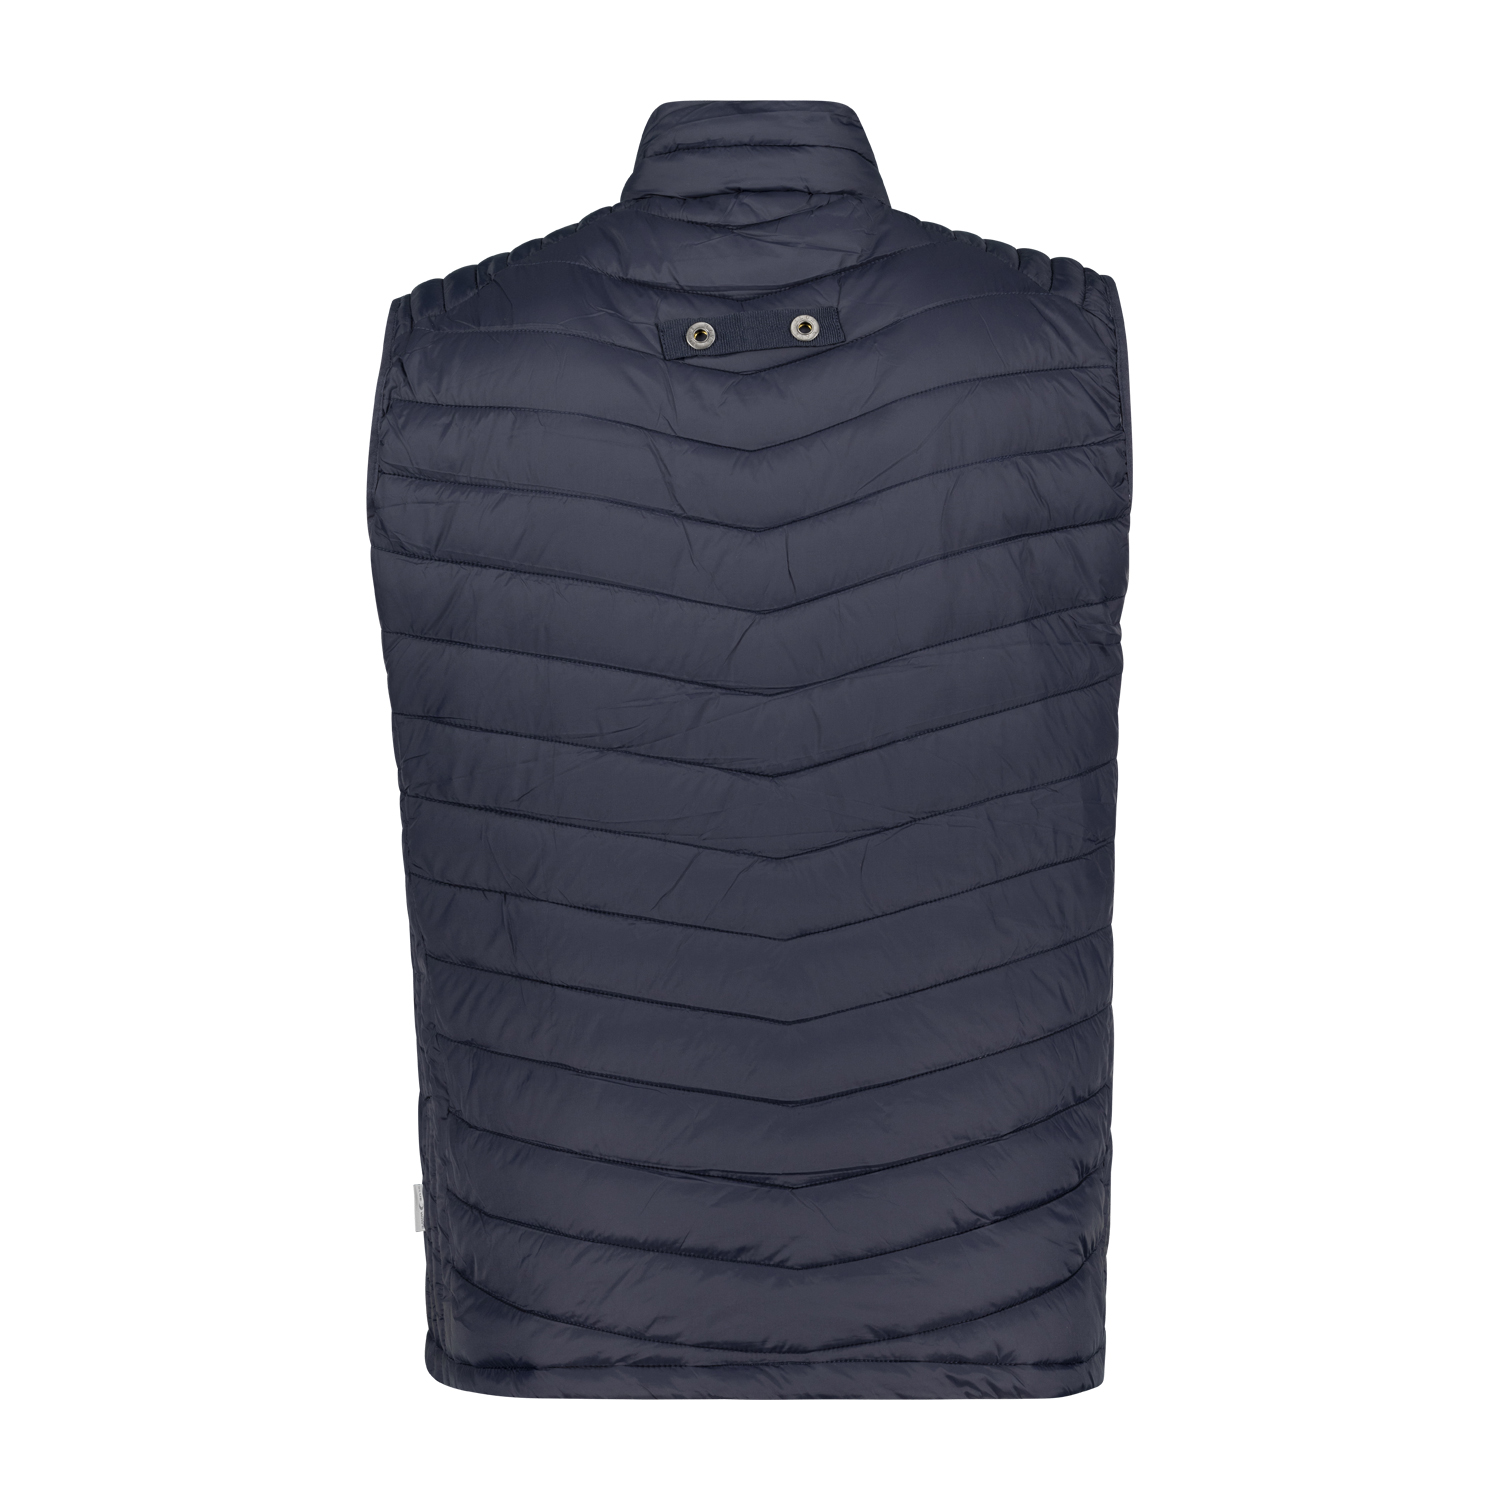 Quilted waistcoat for men in navy by blue wave in plus sizes up to 10XL